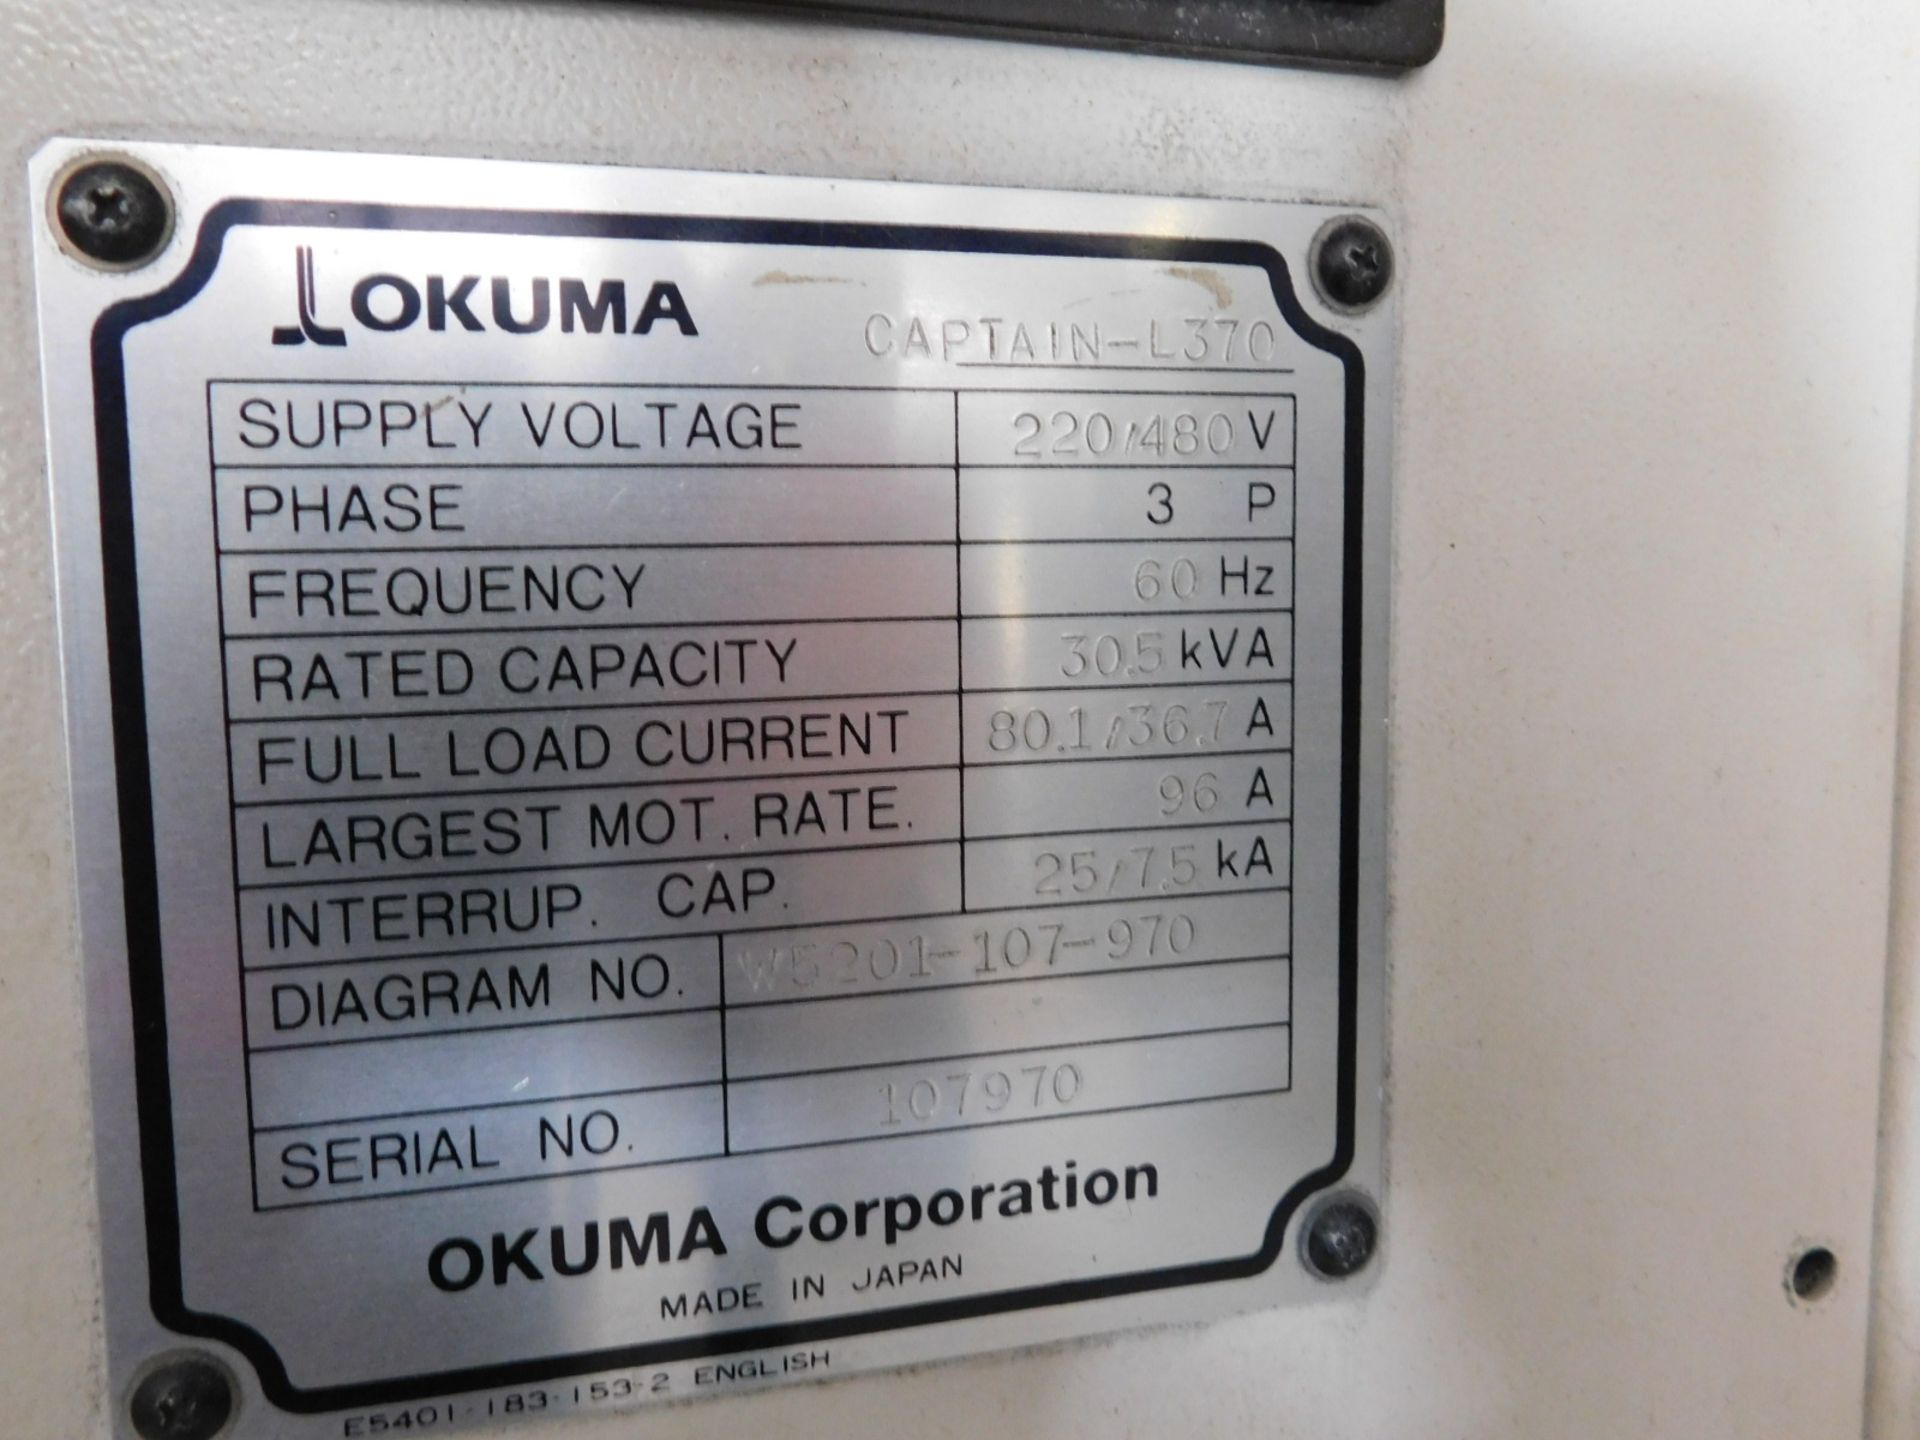 OKUMA CAPTAIN -L370 MW CNC TURNING CENTER, OPS-E100L CNC CONTROL, MAX SWING OVER BED: 20.08", - Image 7 of 9